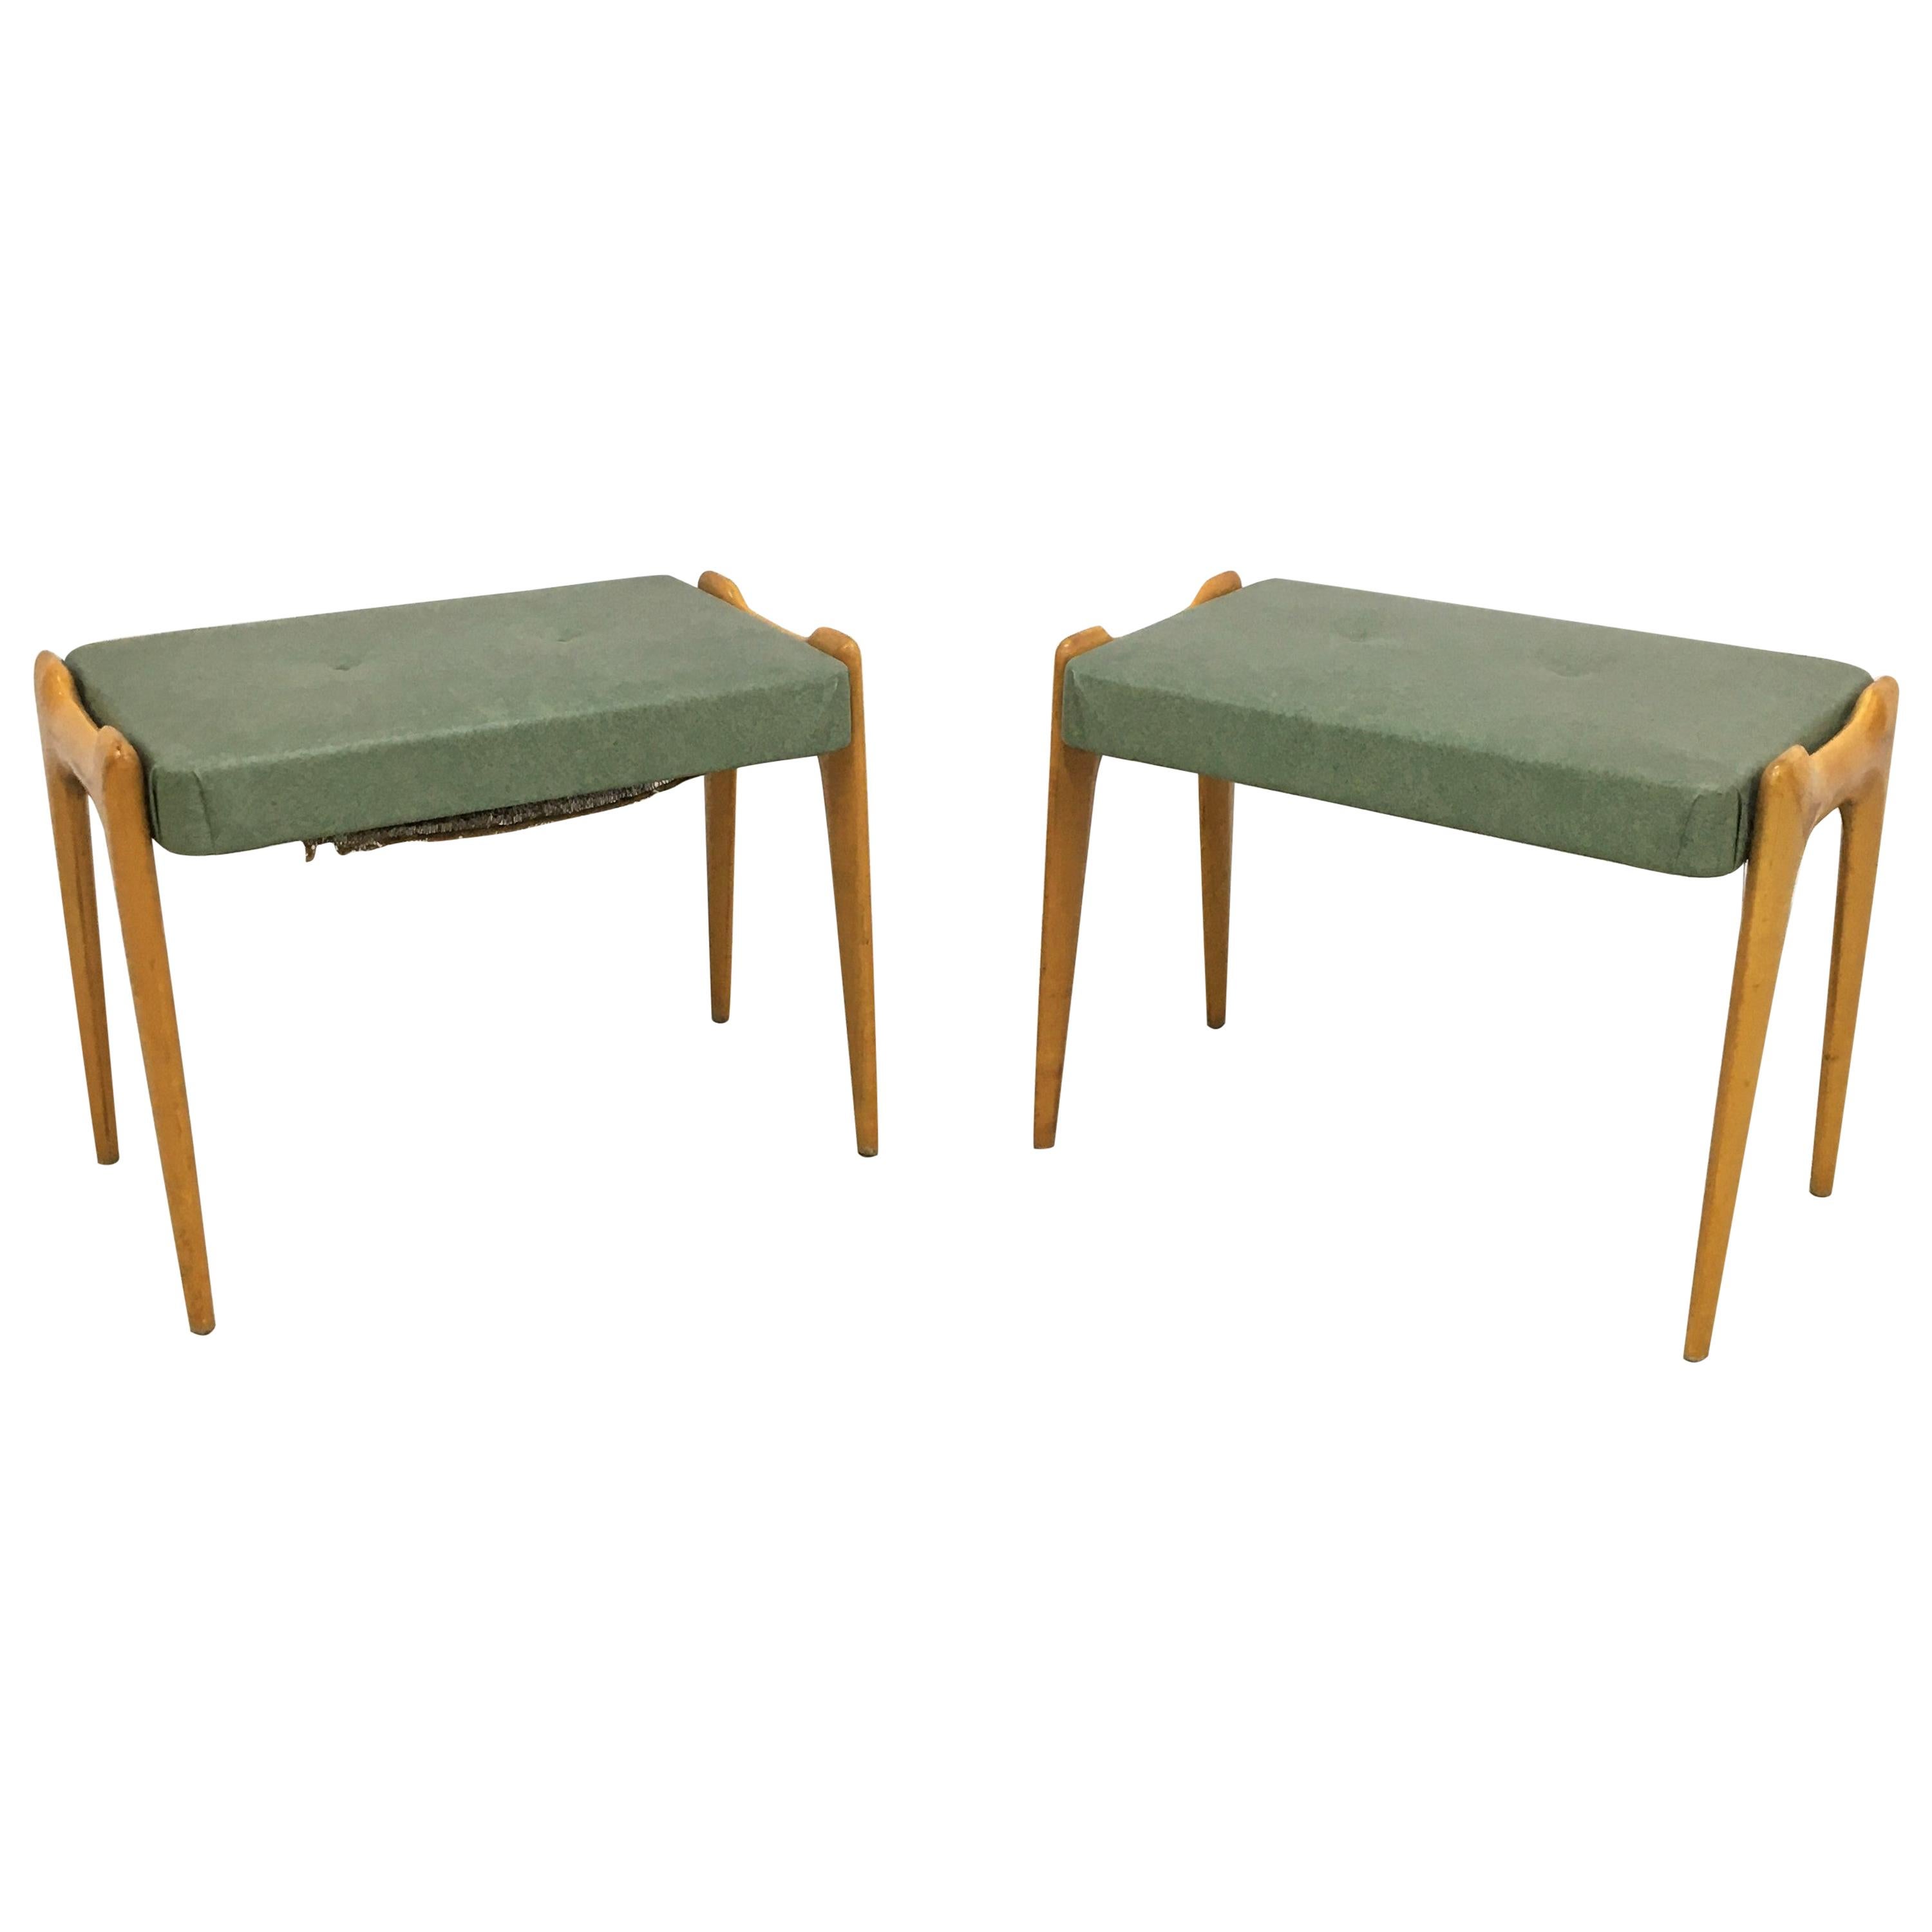 Ico Parisi Vintage Stools in Light Wood and Skai Set of 2 50s Cantù Italy